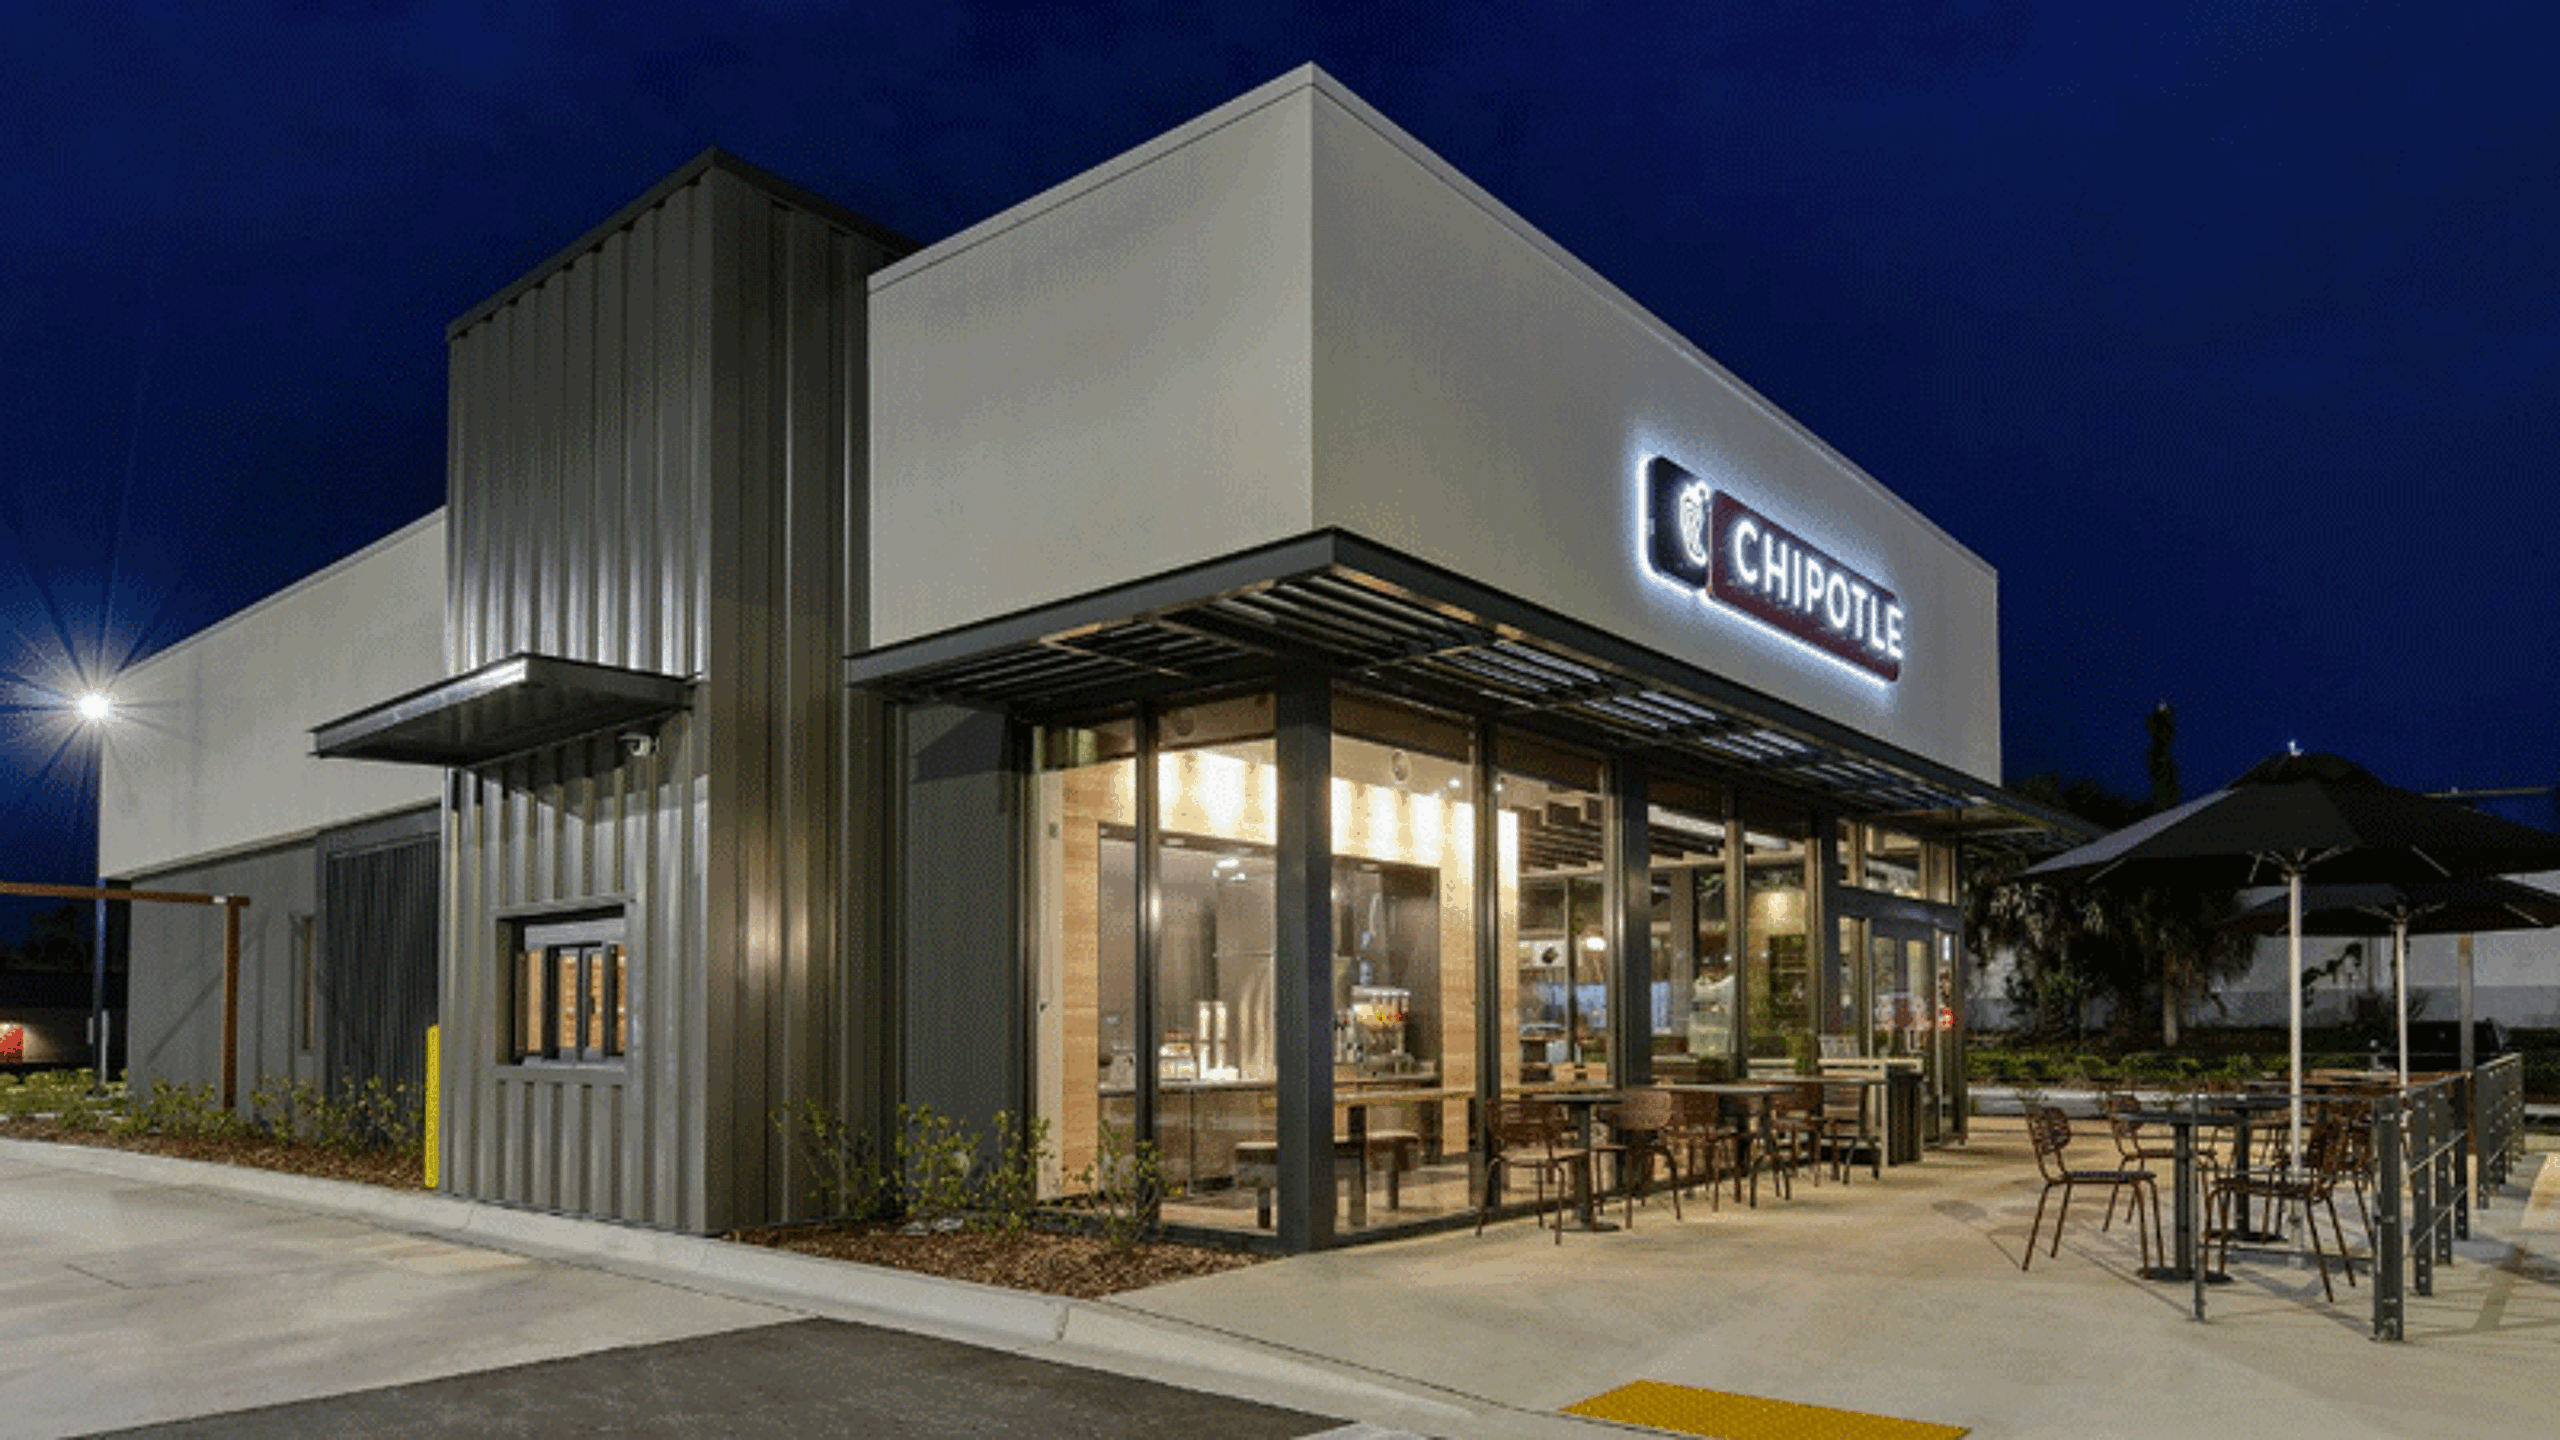 Chipotle redesigns restaurants to improve energy efficiency